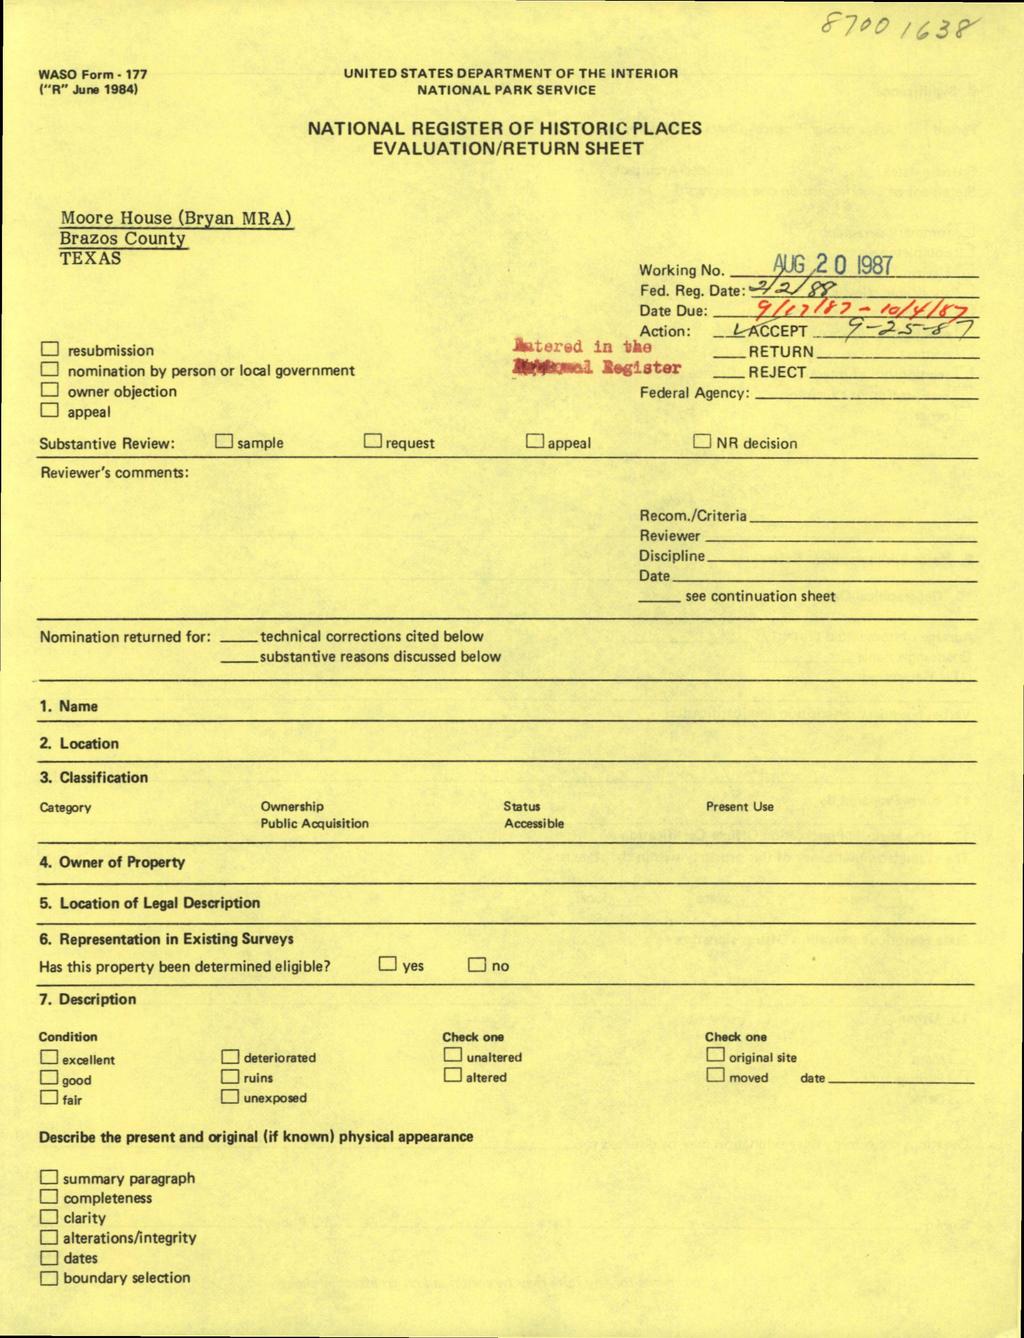 WASO Form - 177 ("R" June 1984) UNITED STATES DEPARTMENT OF THE INTERIOR NATIONAL PARK SERVICE NATIONAL REGISTER OF HISTORIC PLACES EVALUATION/RETURN SHEET Moore House (Bryan MRA) Brazos County TEXAS